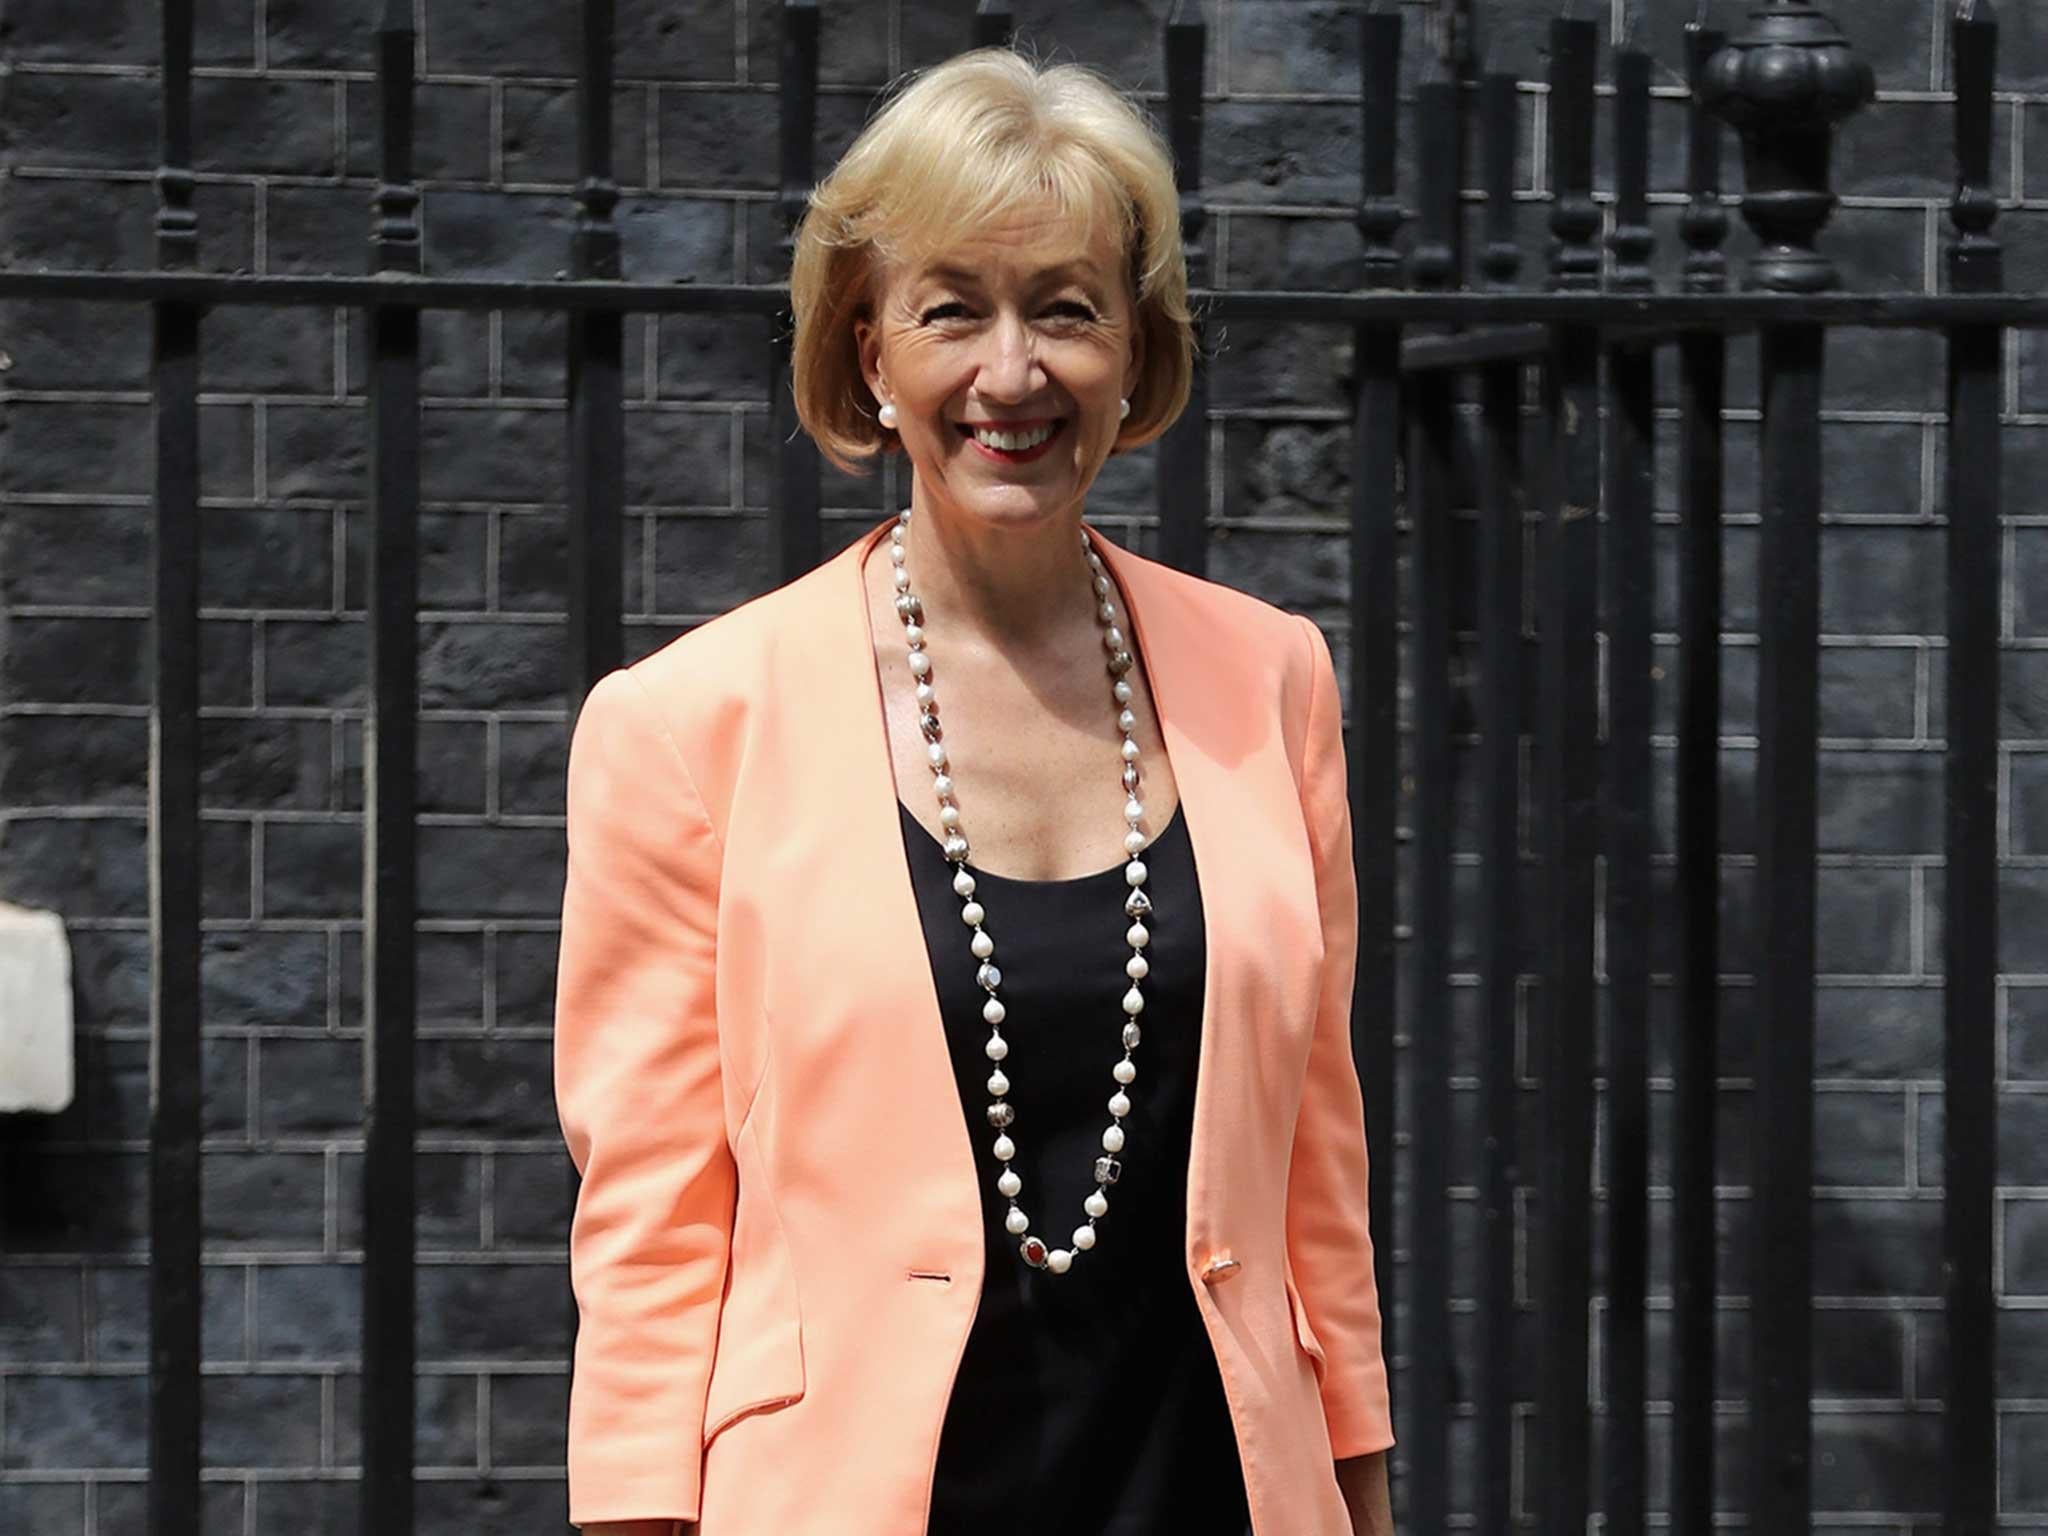 Andrea Leadsom unsuccesfully stood for Tory leader this month